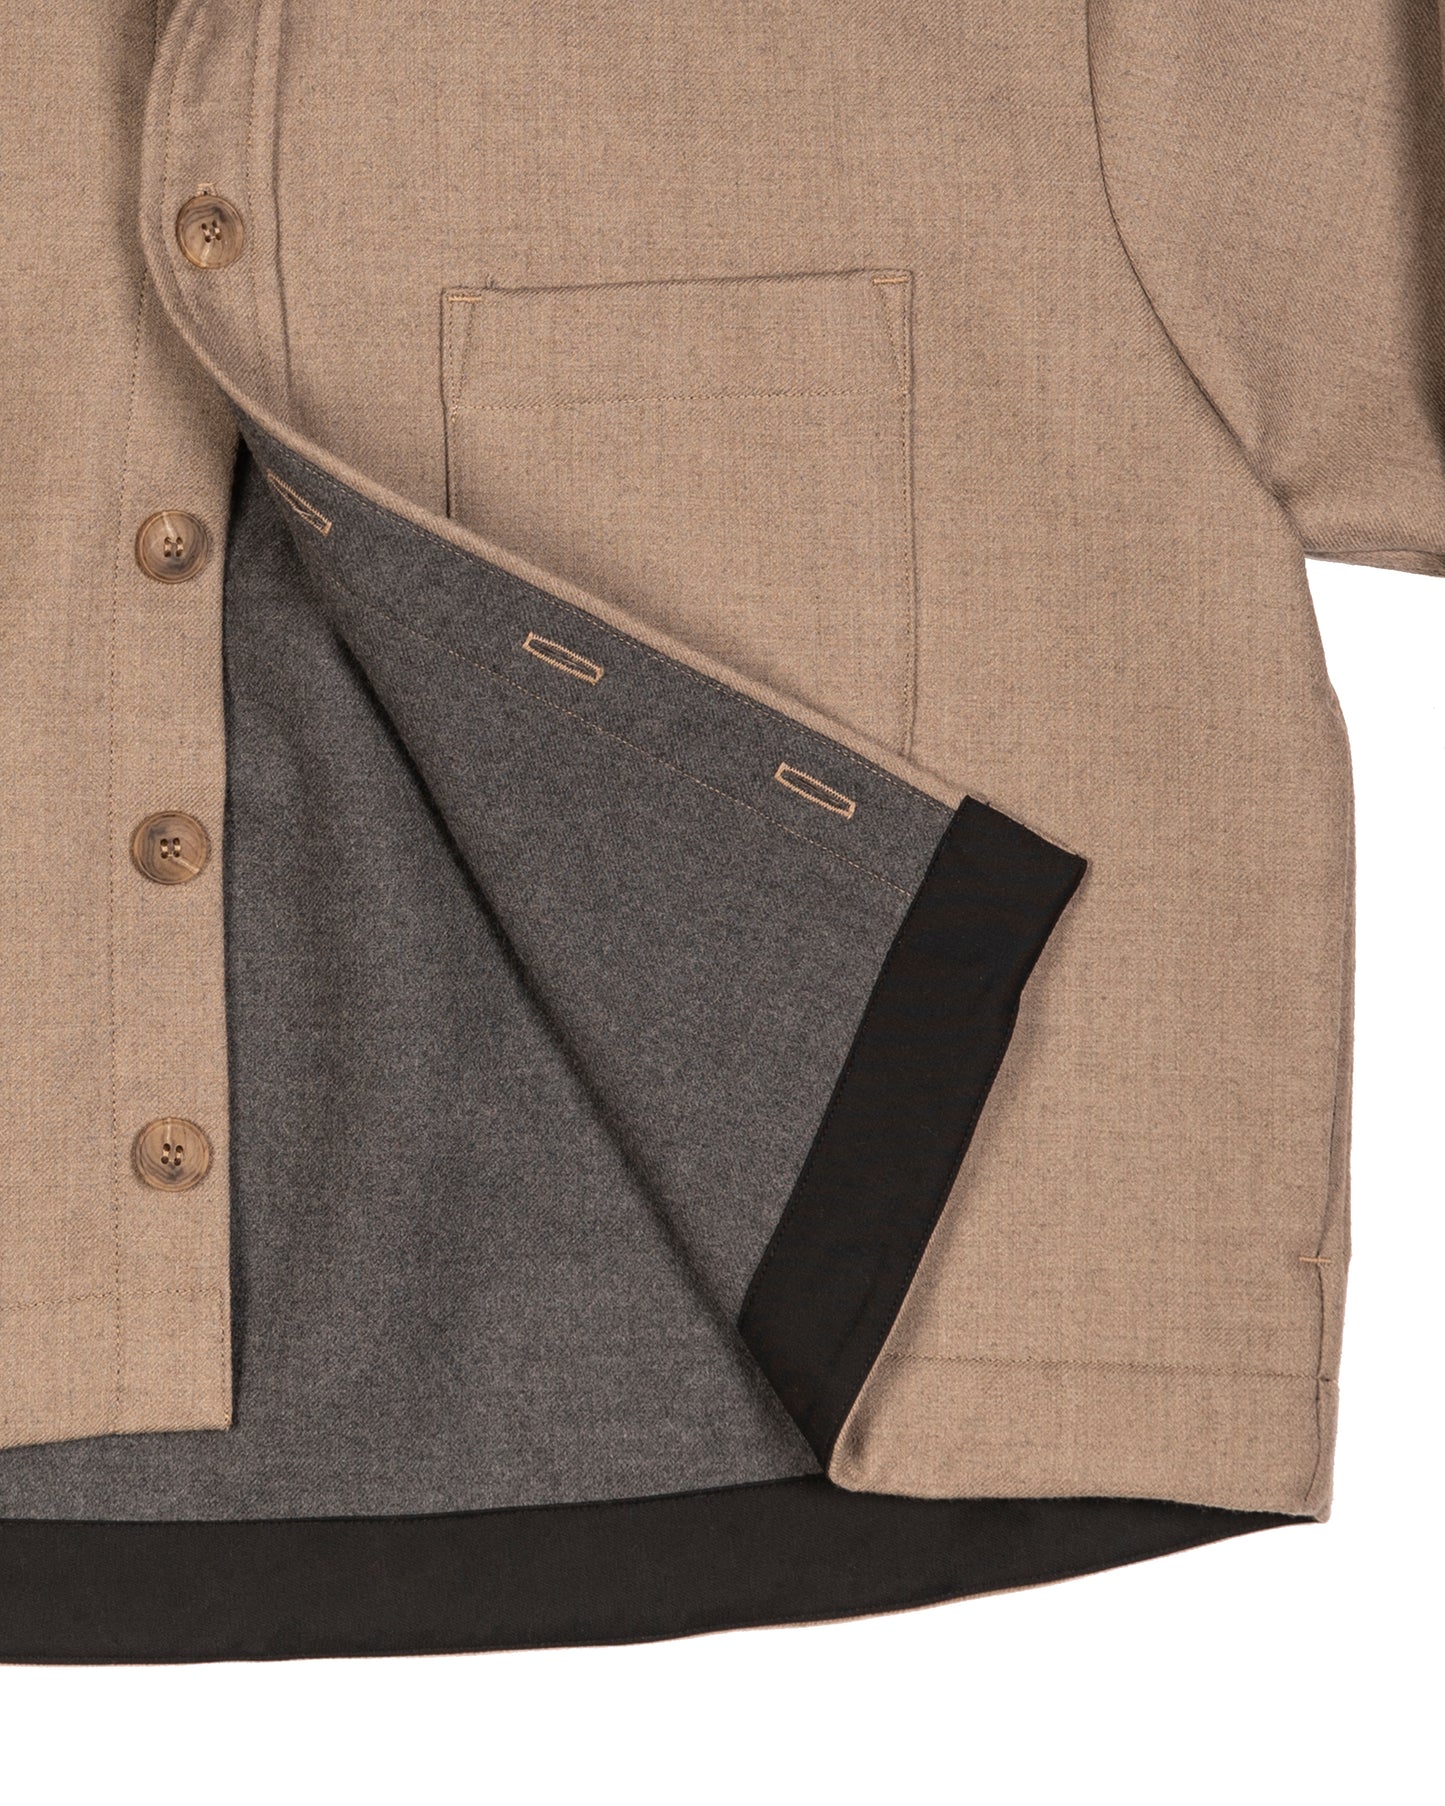 Lico Jacket - Sand - Double Faced Wool